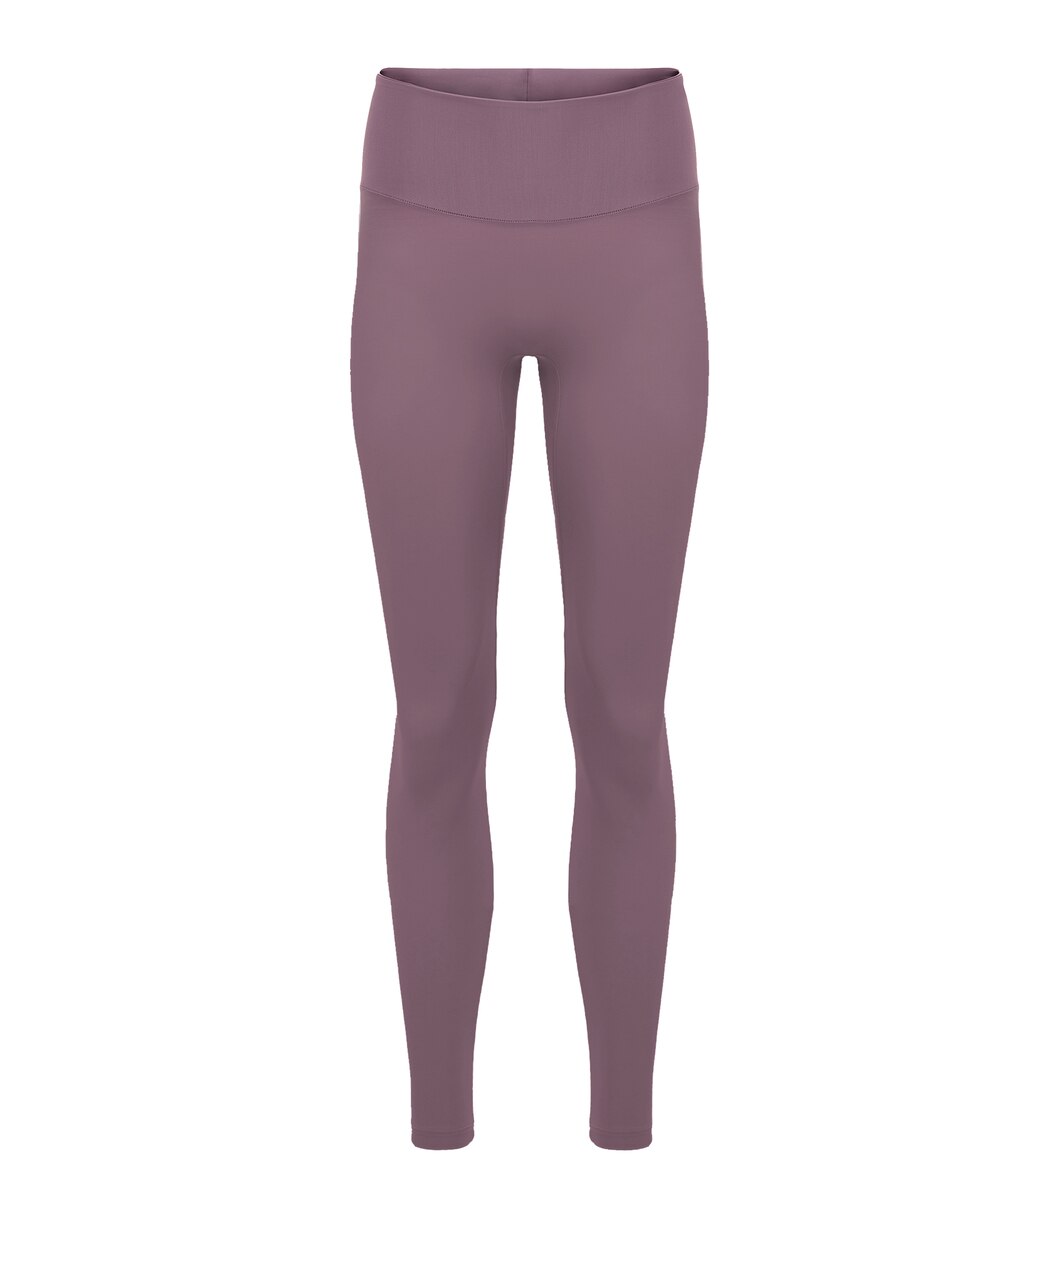 Medallion Crop Legging with pockets - XS for Pilates